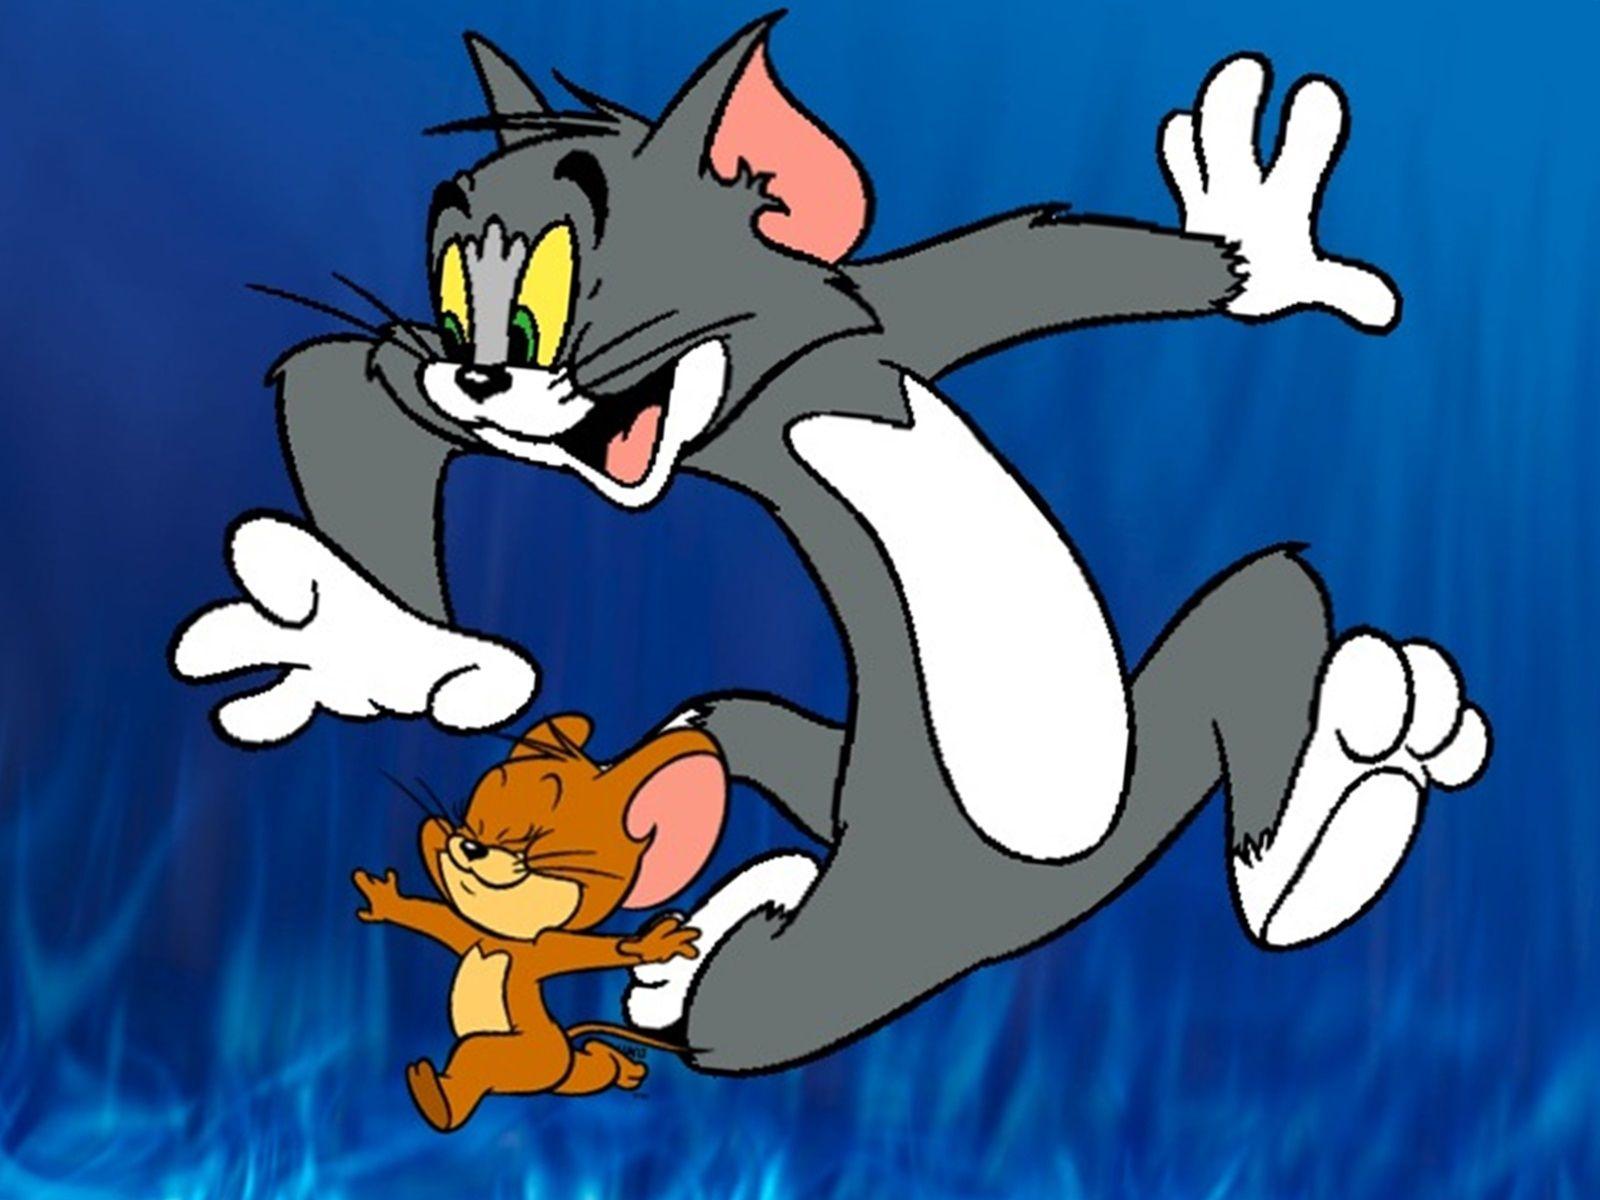 Tom and Jerry Cartoon Wallpapers Top Free Tom and Jerry Cartoon